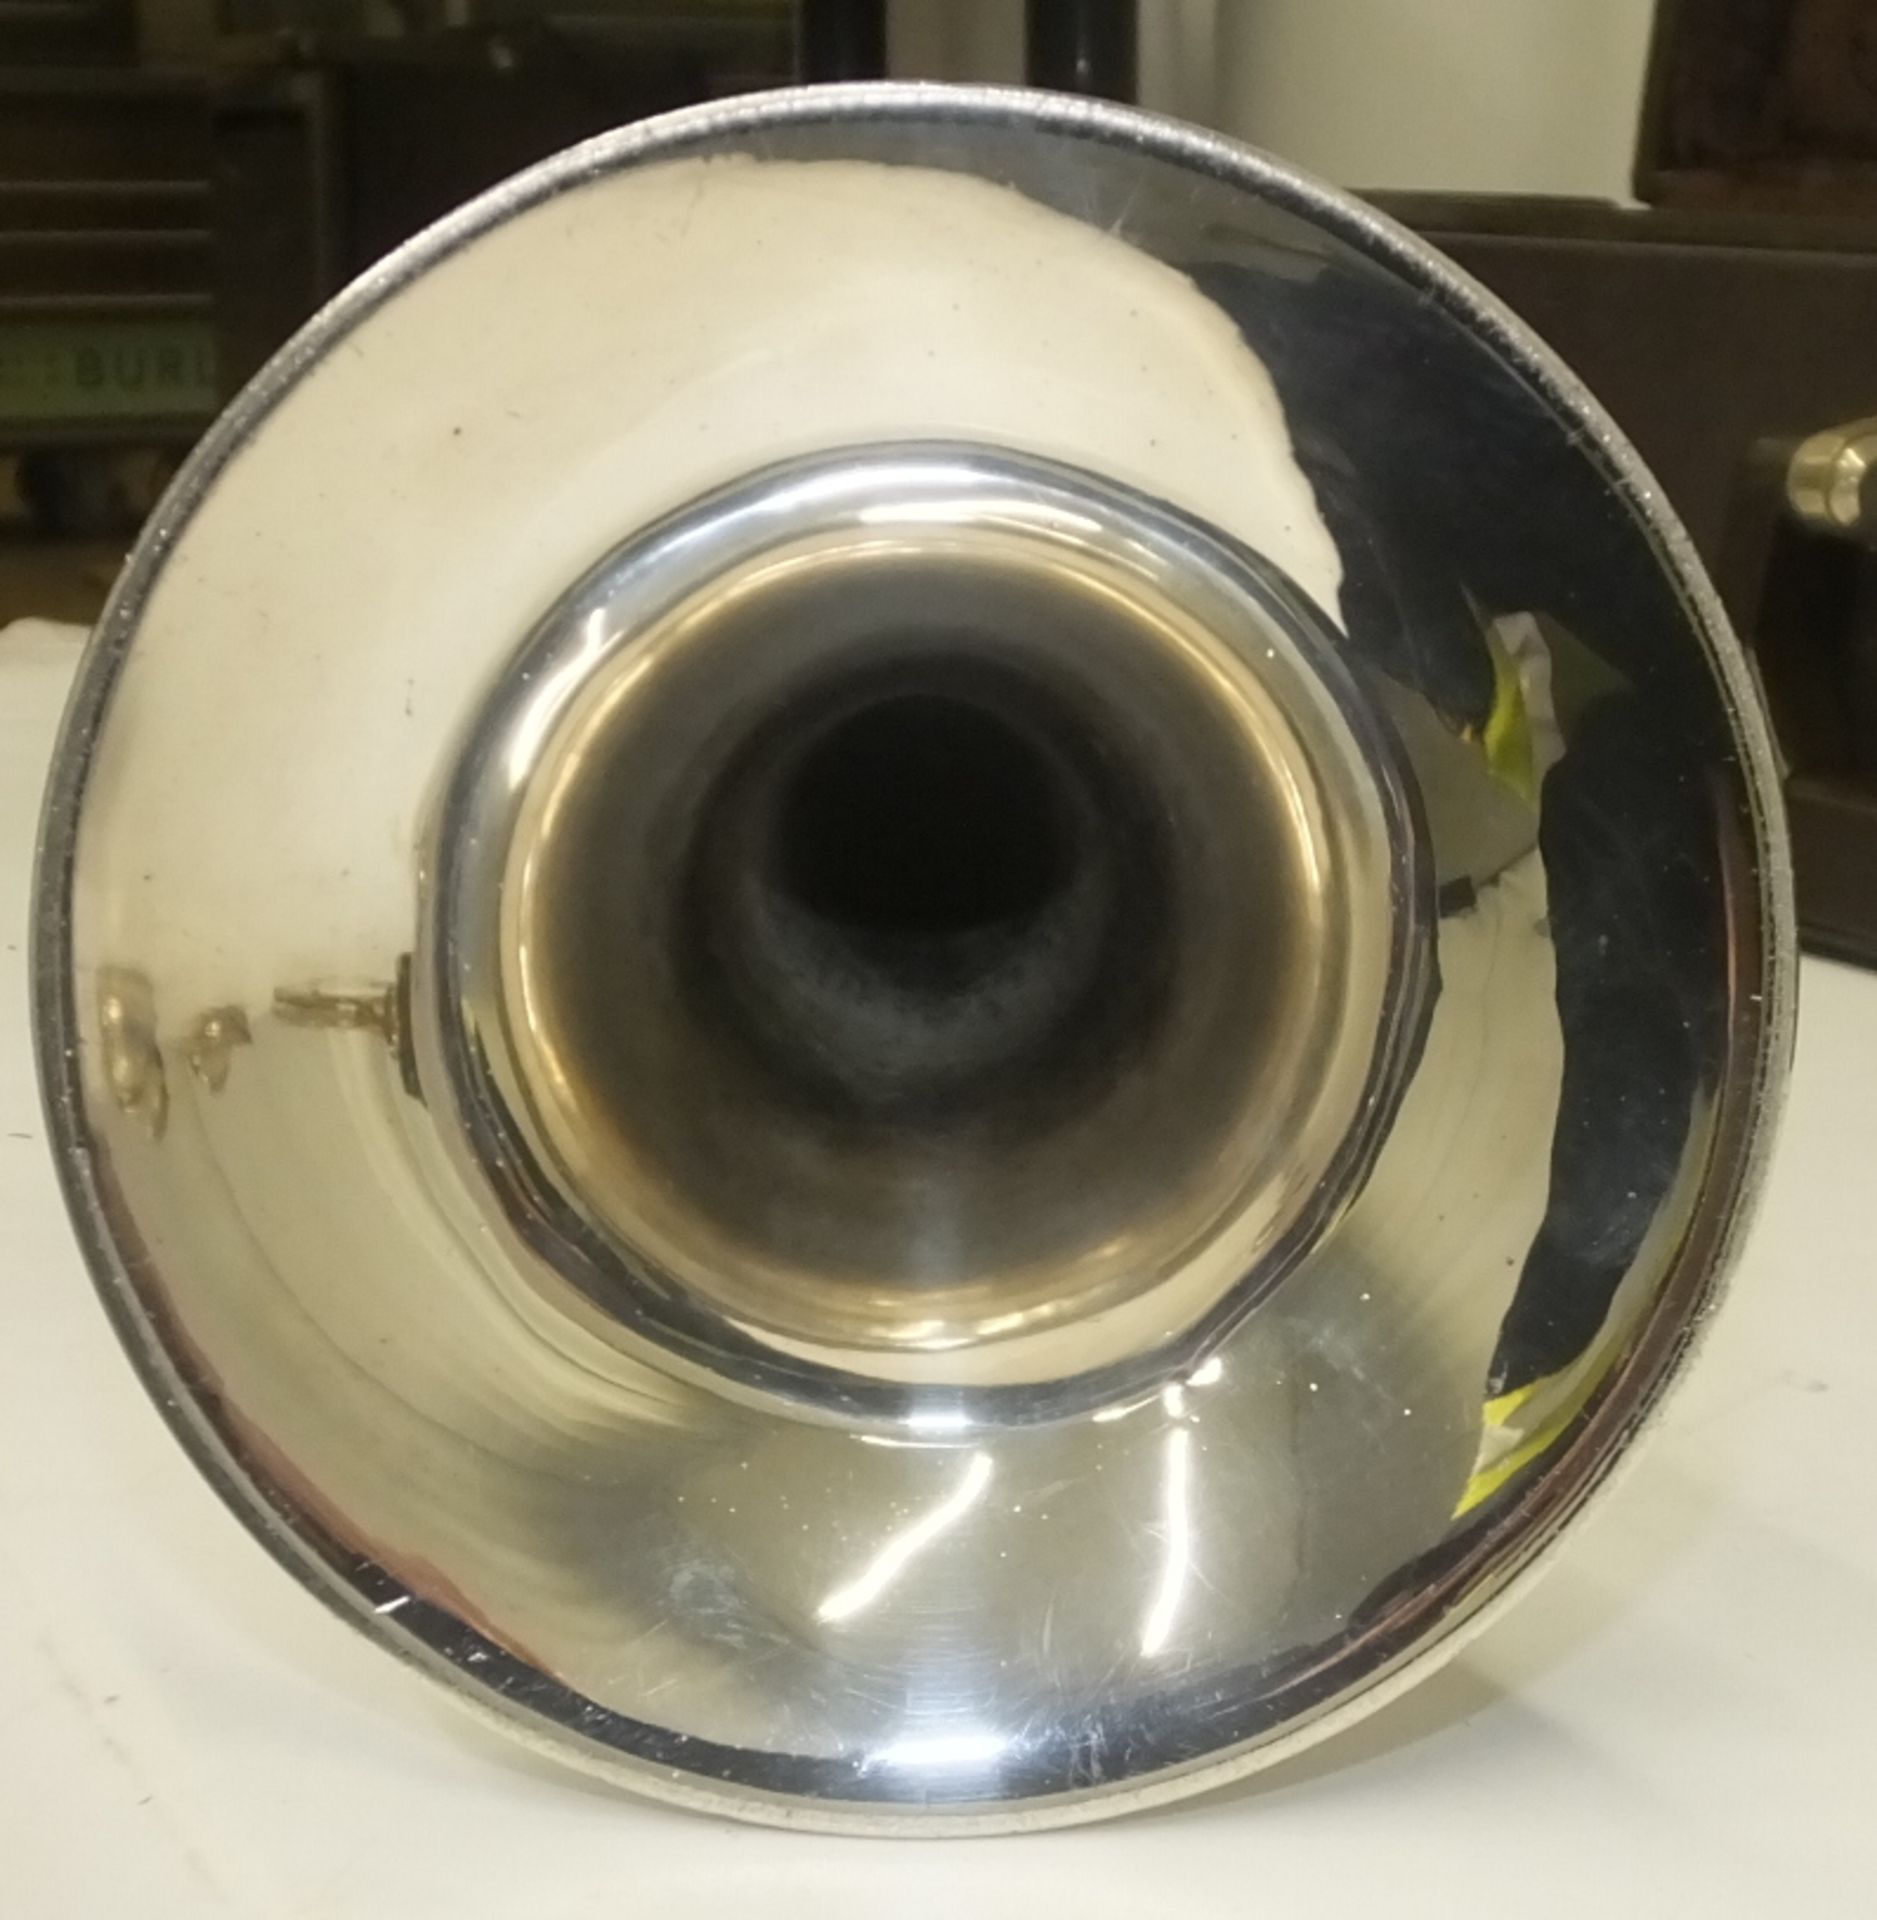 Besson 700 Fanfare Trumpet in case - Serial Number - Unknown - Image 8 of 10